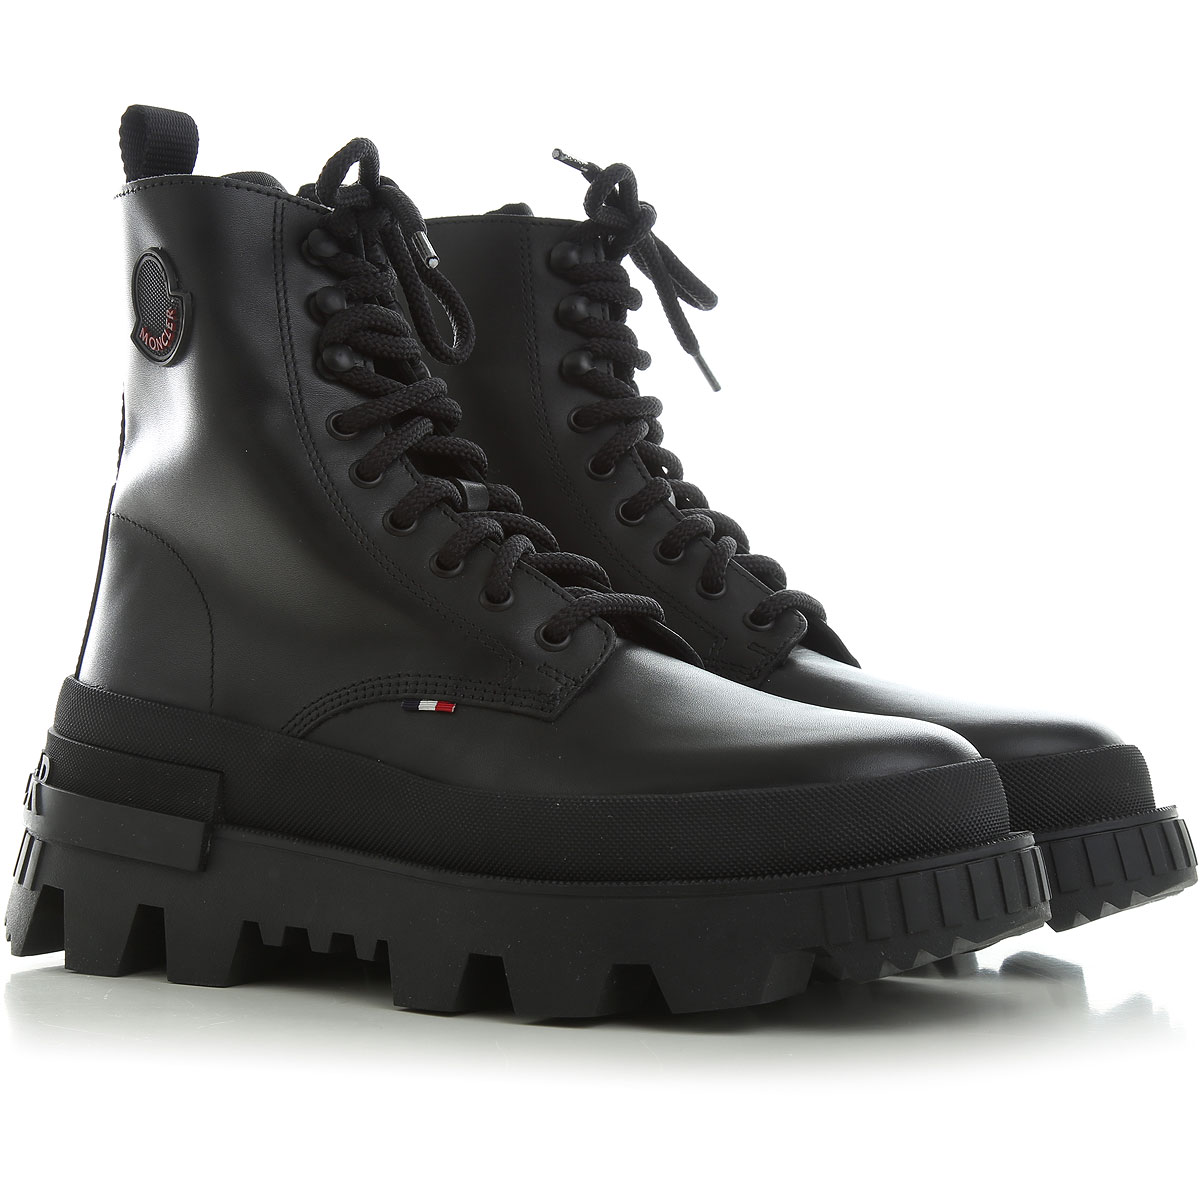 Mens Shoes Moncler, Style code: 4f70700-019a6-999